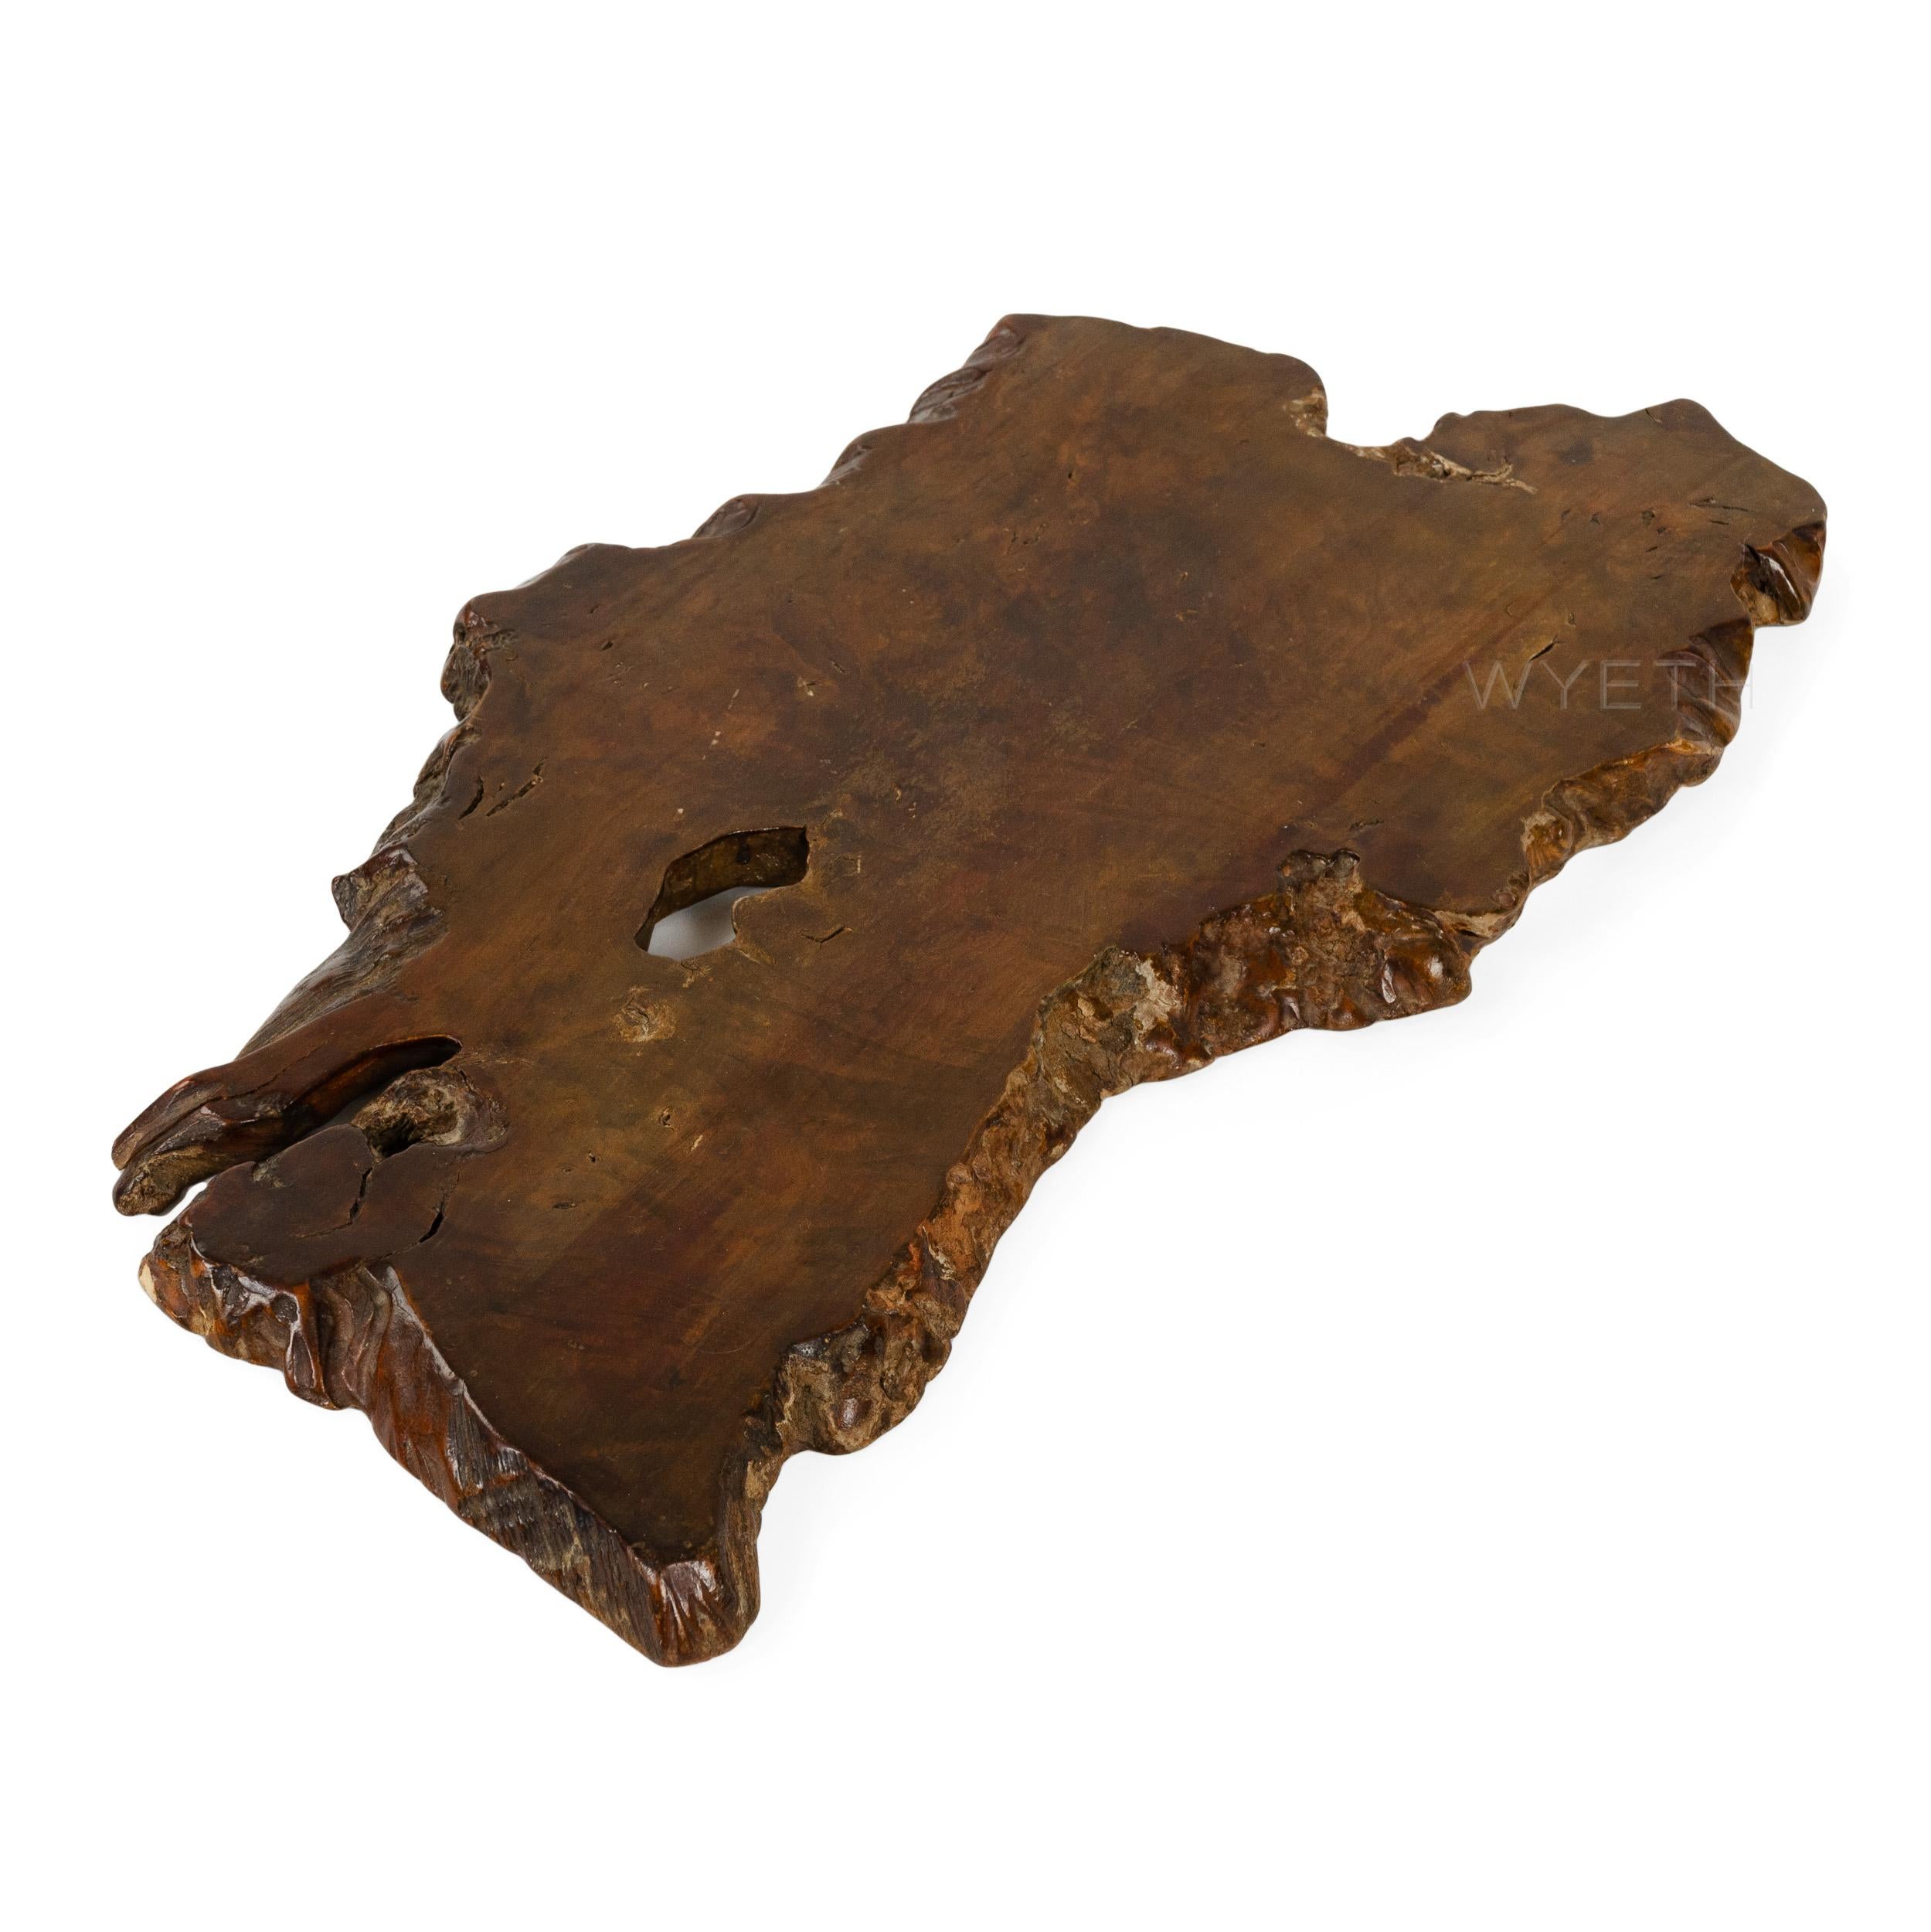 A shapely burl wood tray or platter with live edges all around.